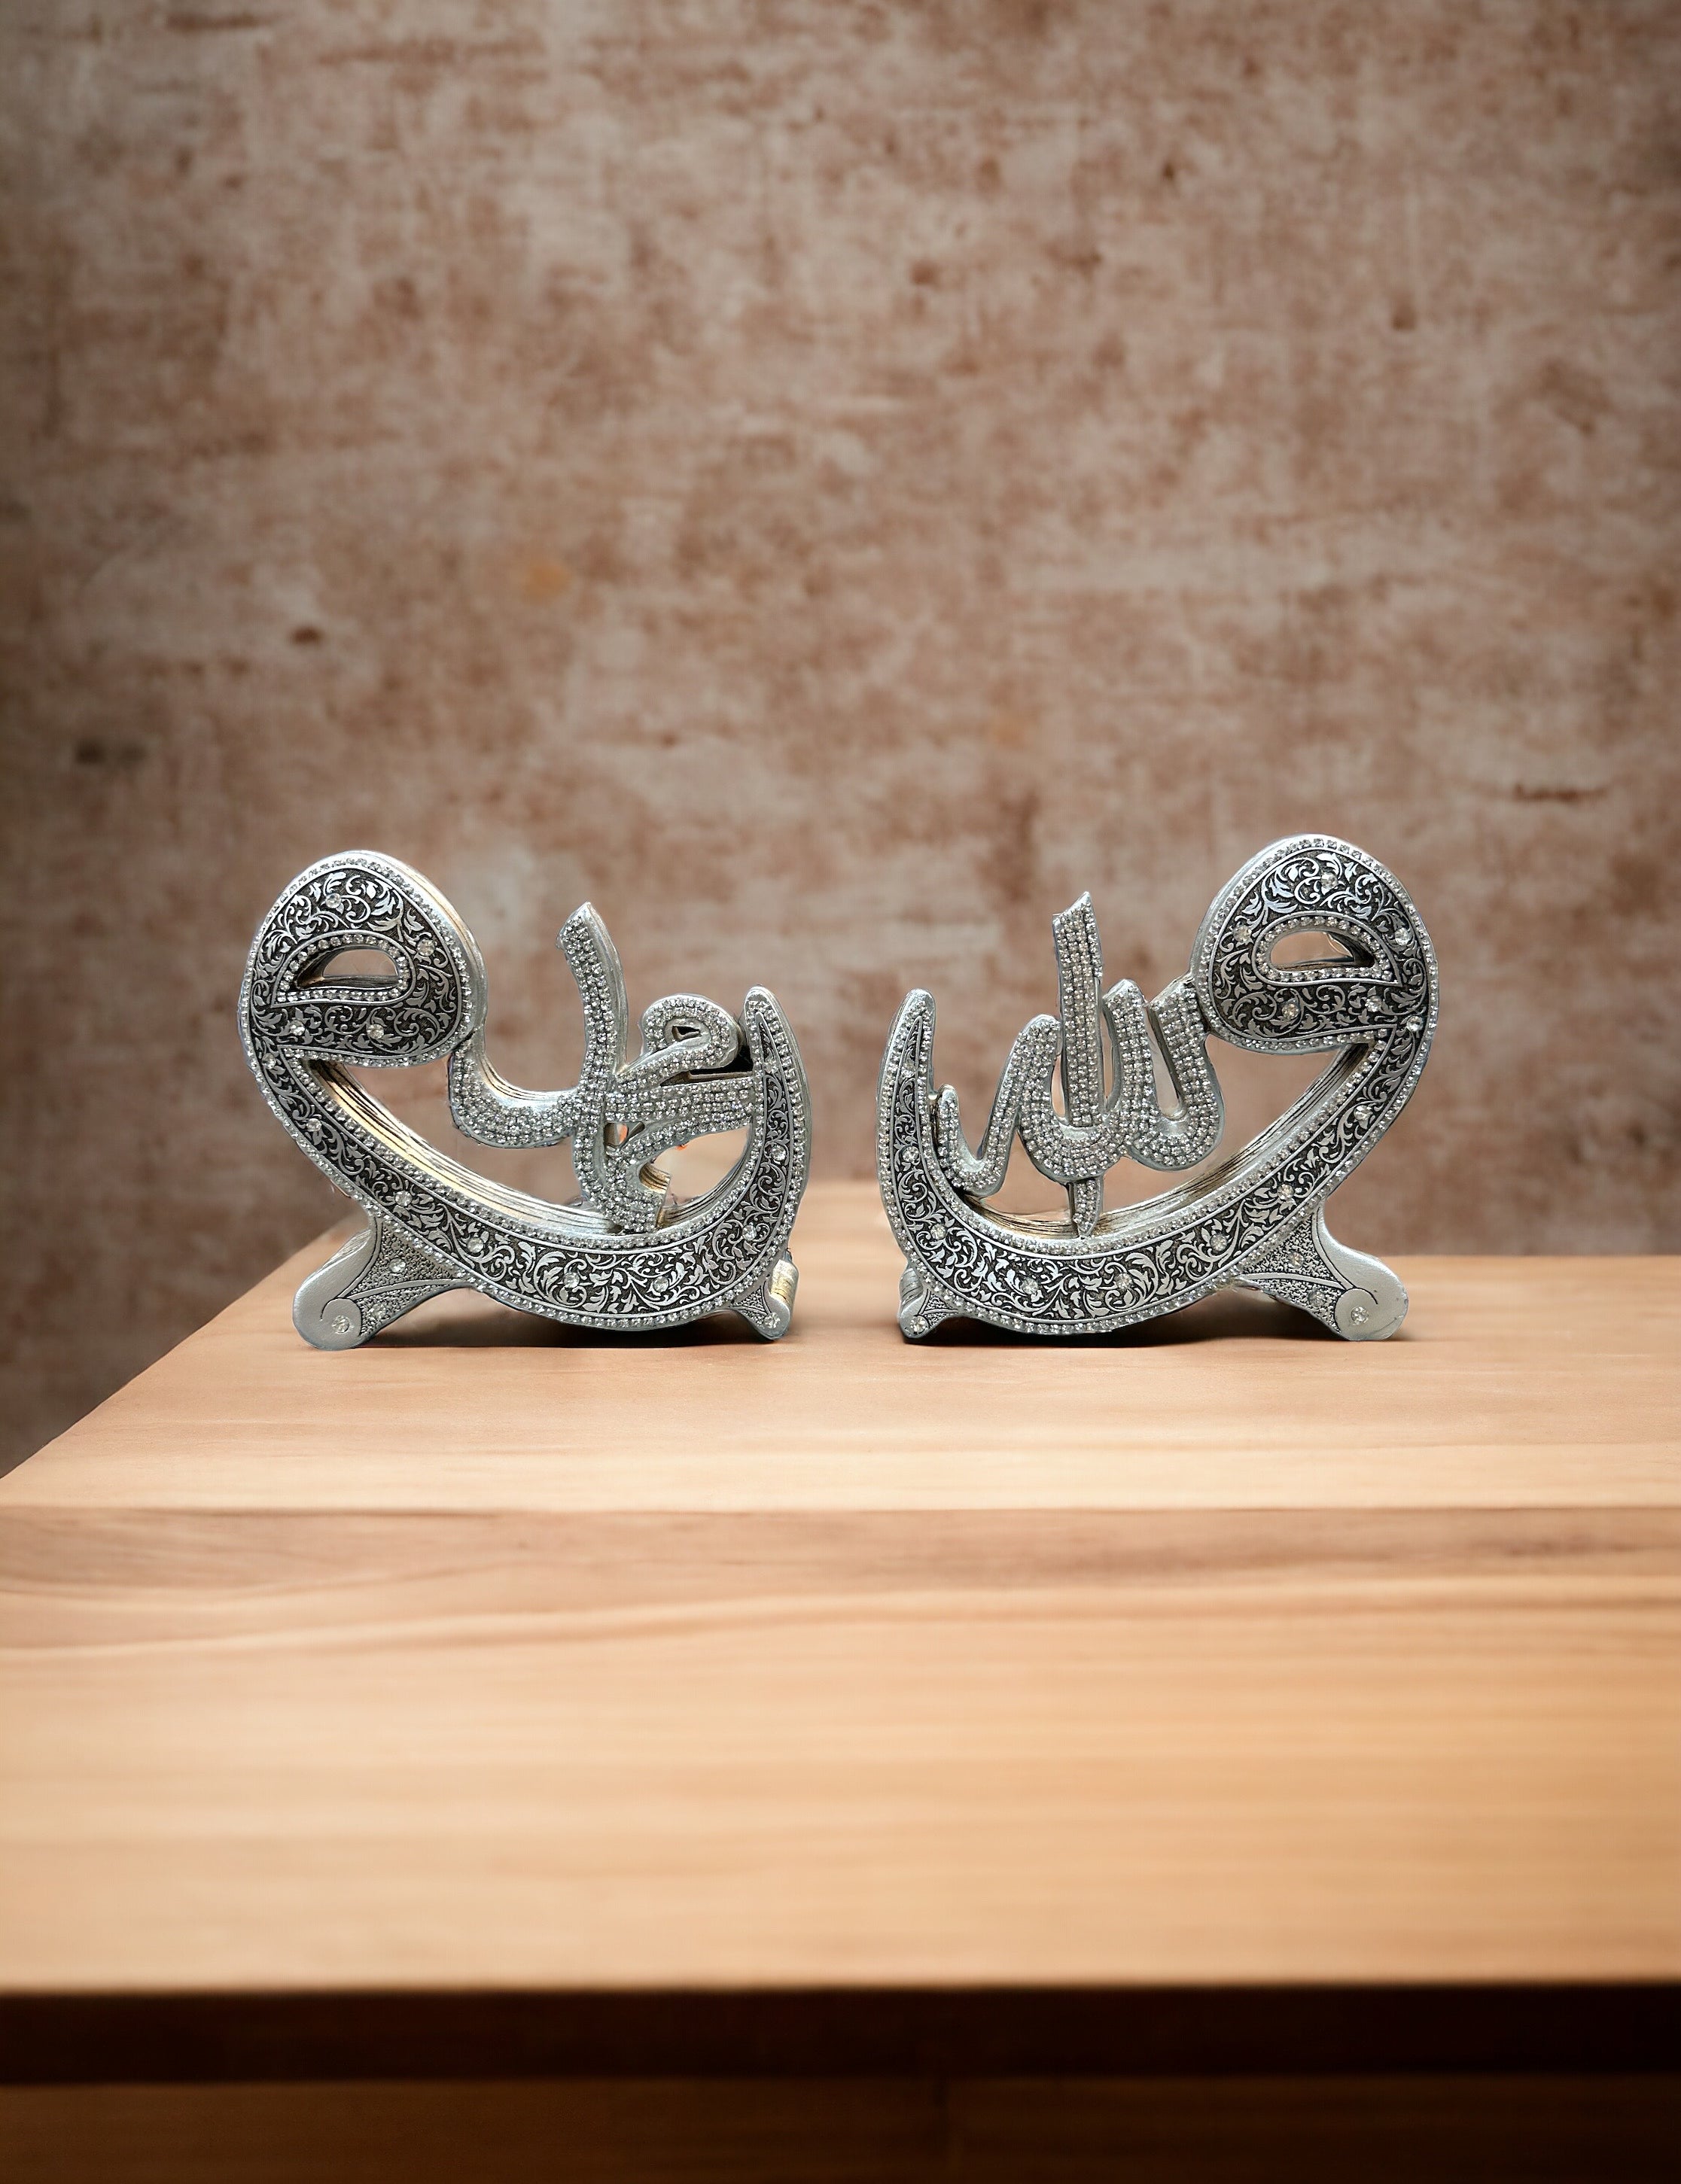 Allah (SWT) & Mohamed (SAW) Turkish Decorative Craft